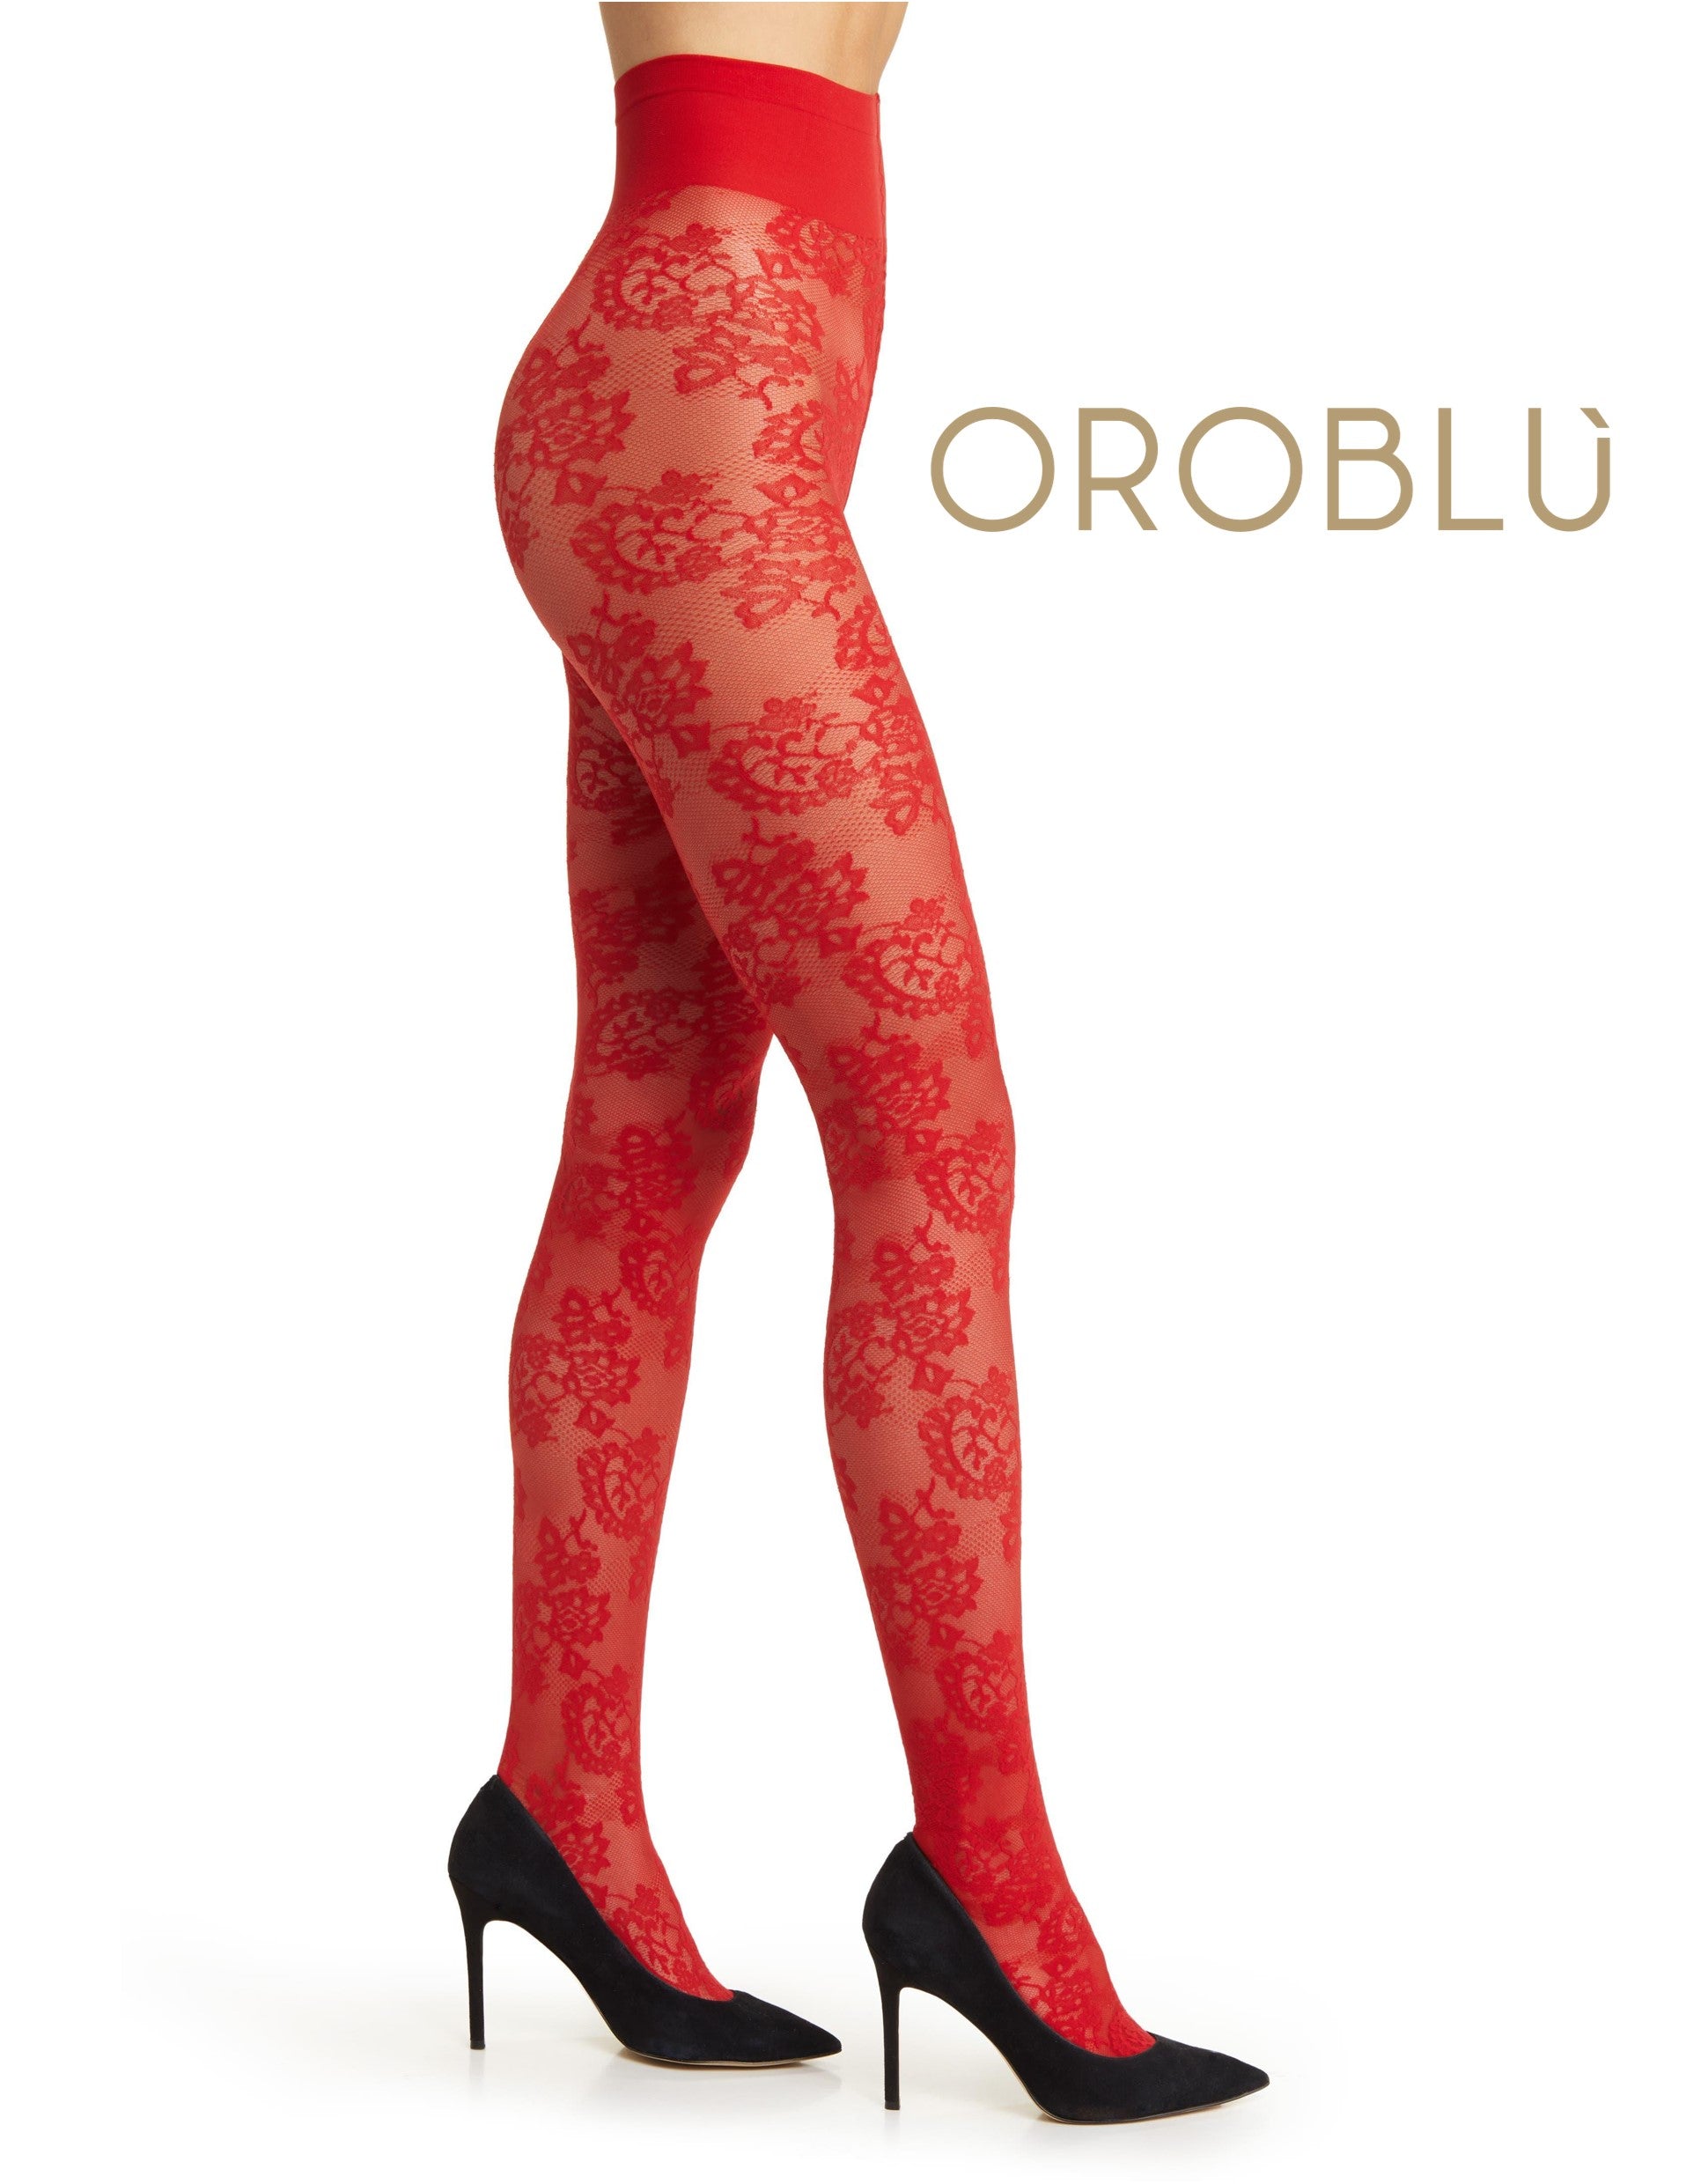 Oroblu Sheer Fine Lace Tights Red – Starts With Legs